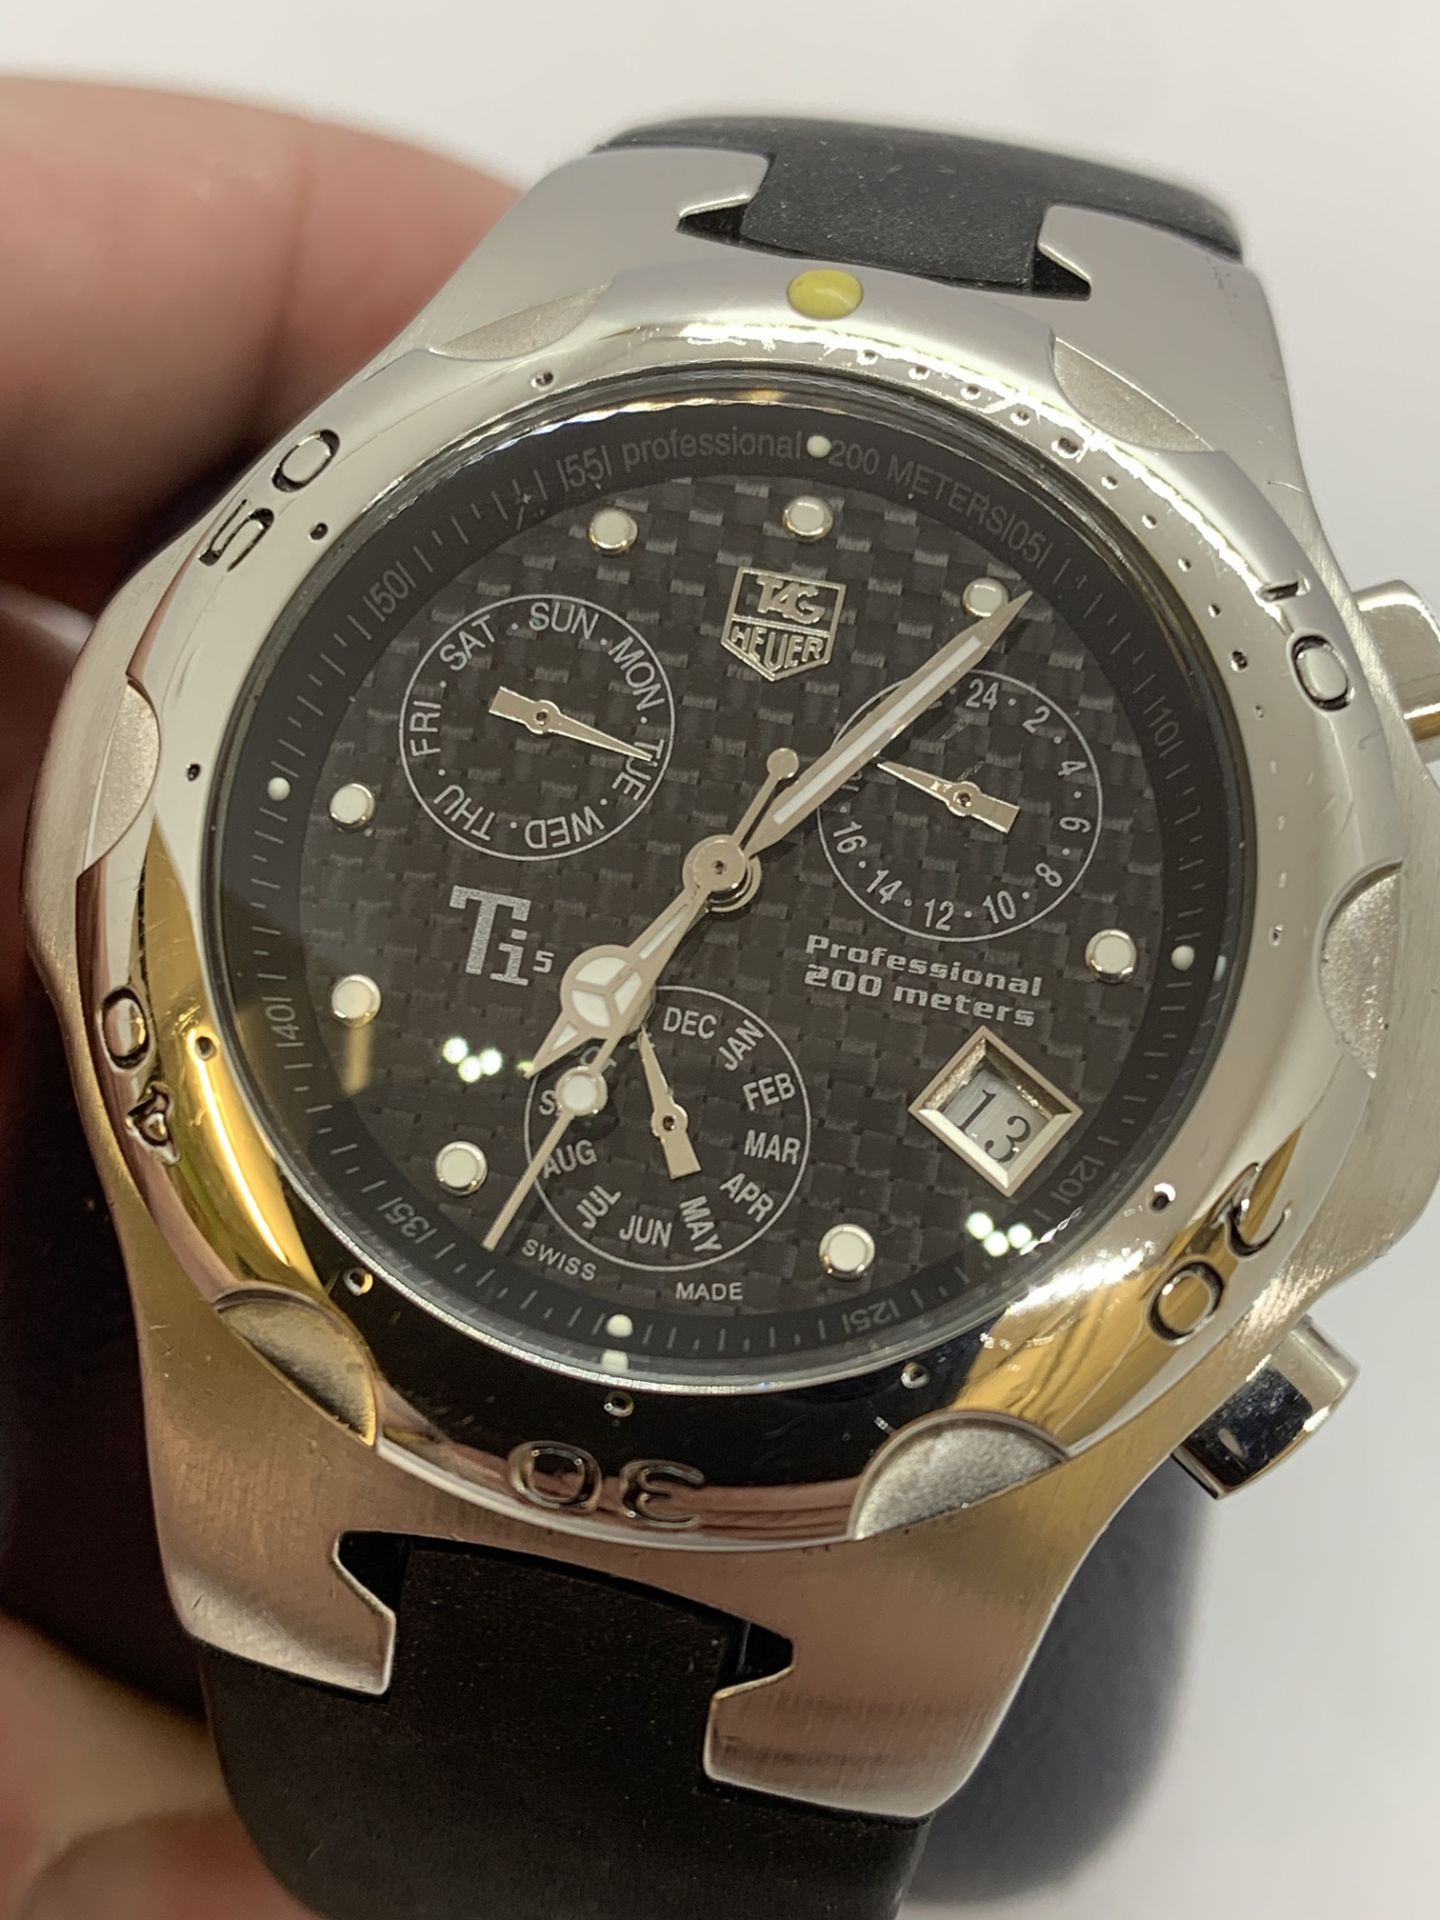 TAG HEUER PROFESSIONAL CHRONO AUTOMATIC WATCH - 200 METERS